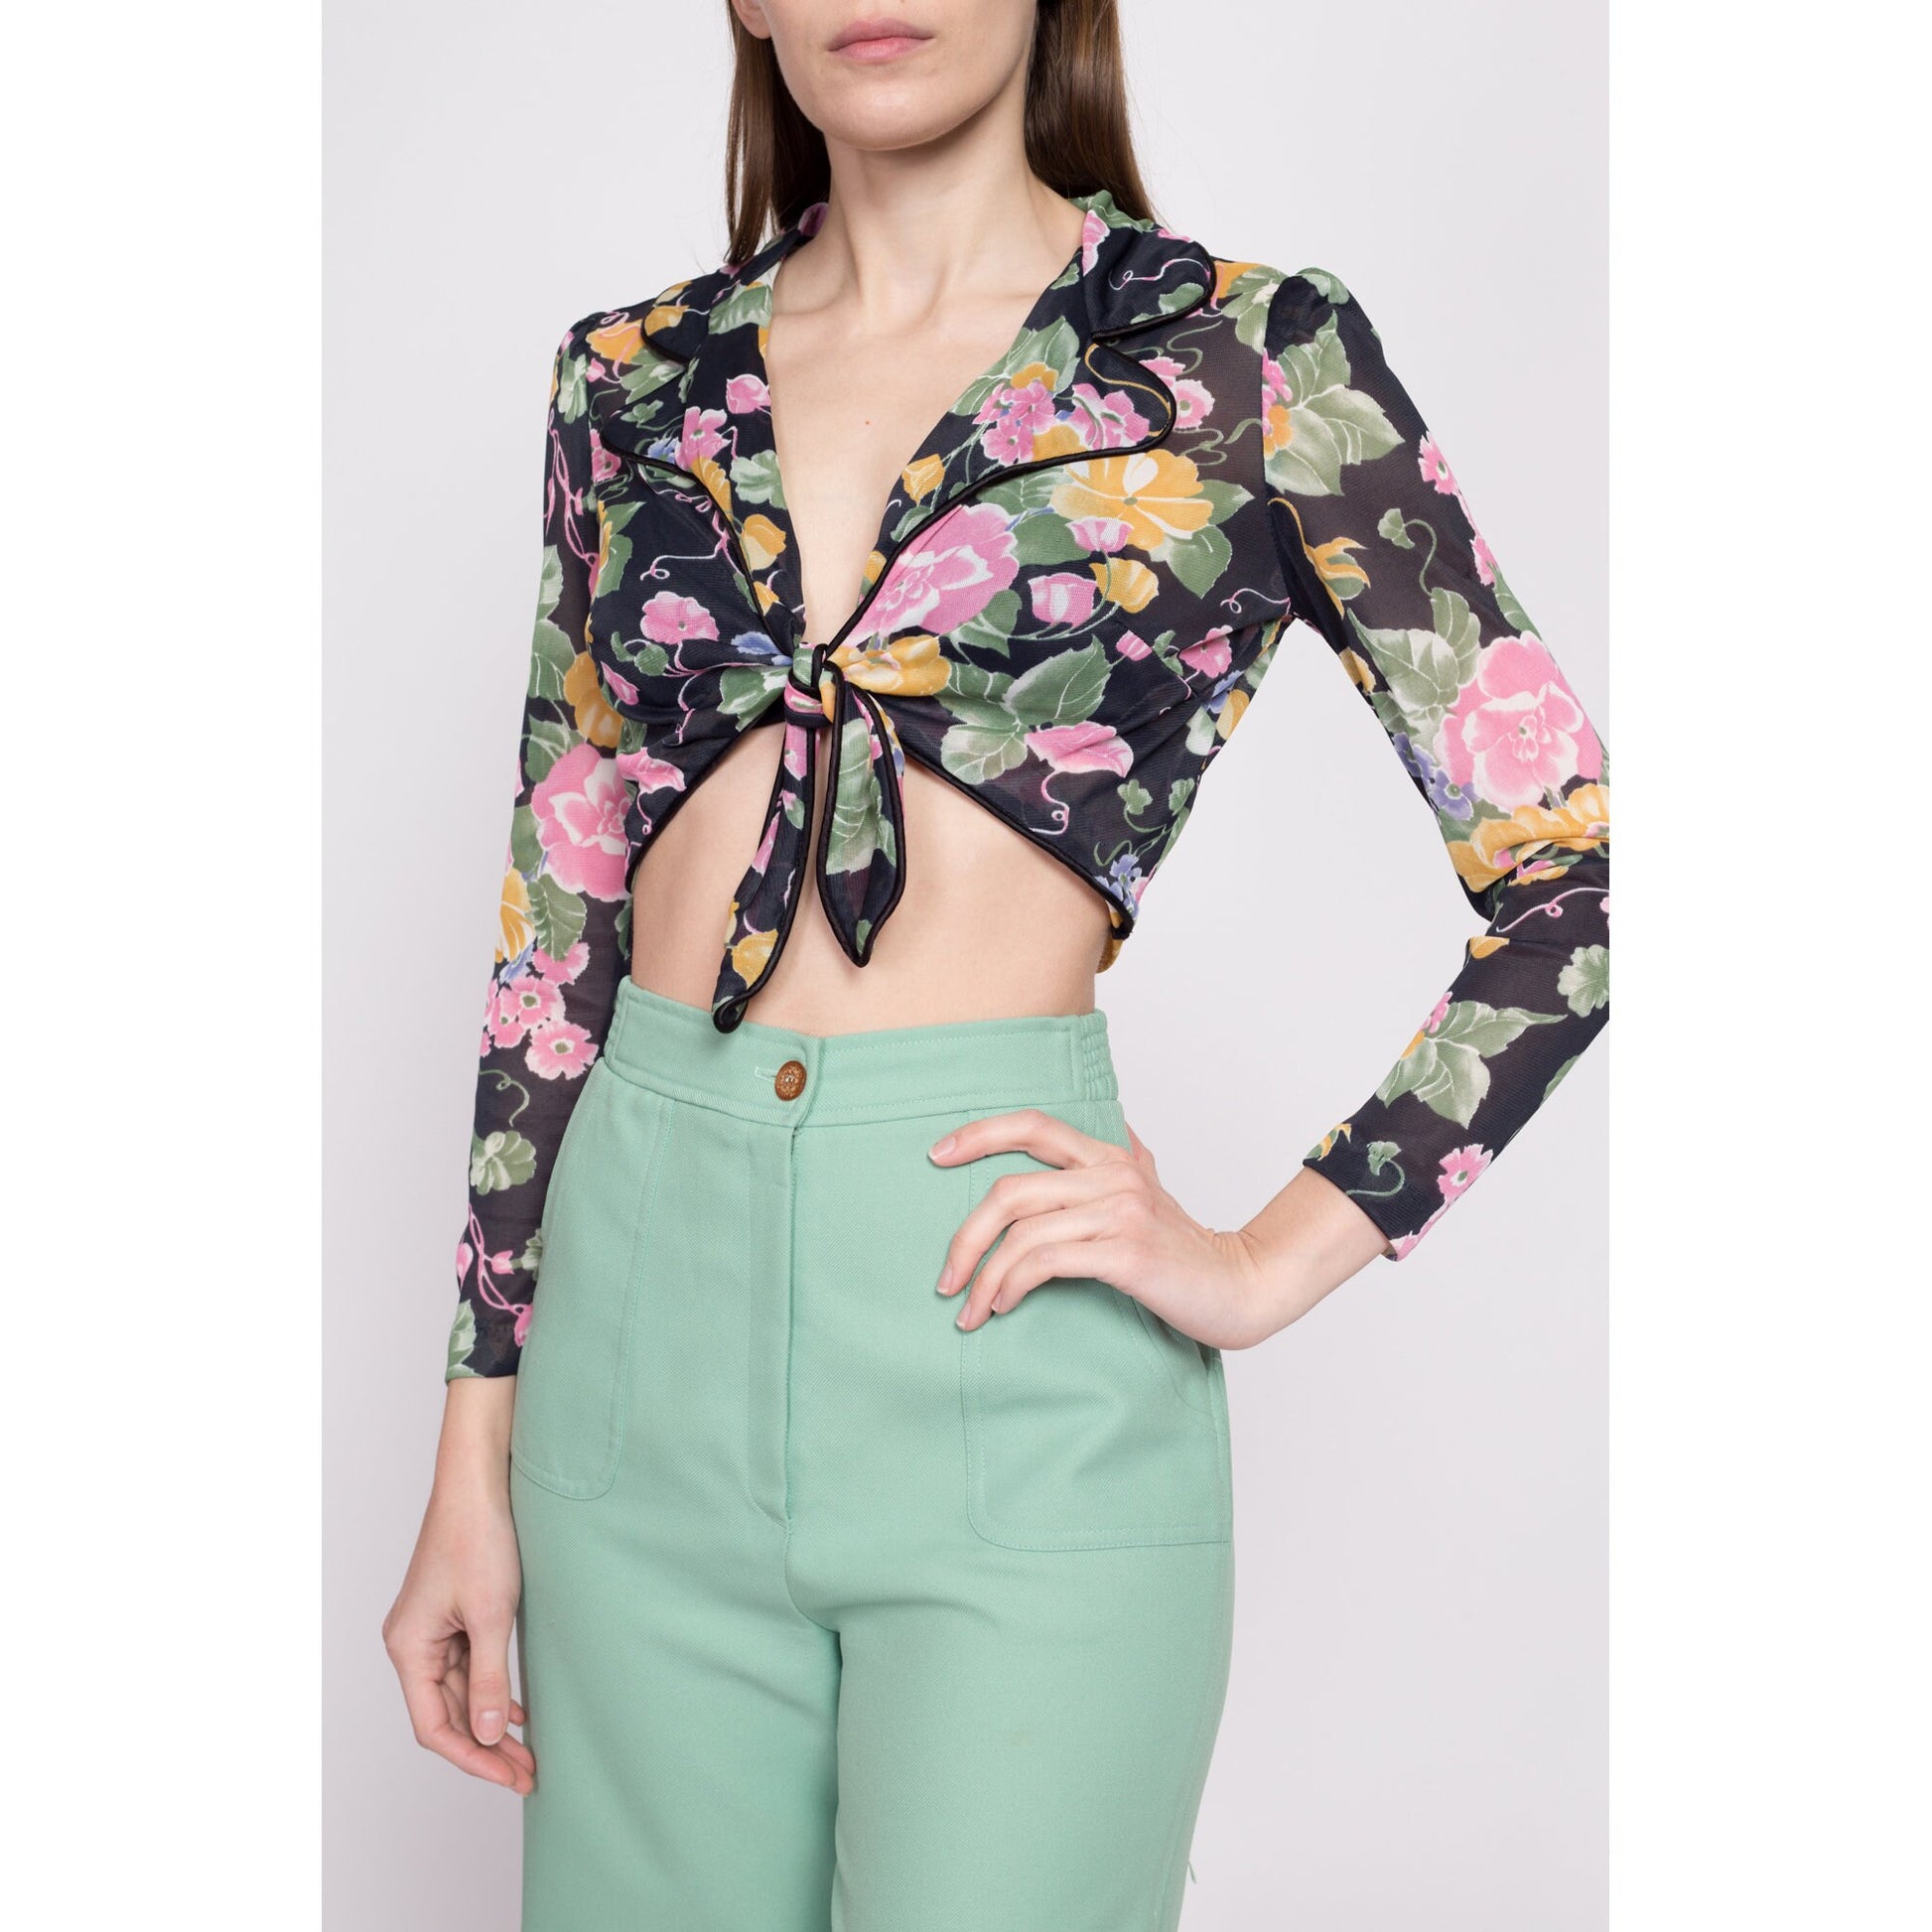 70s Sheer Black Floral Tie Front Crop Top - Small – Flying Apple